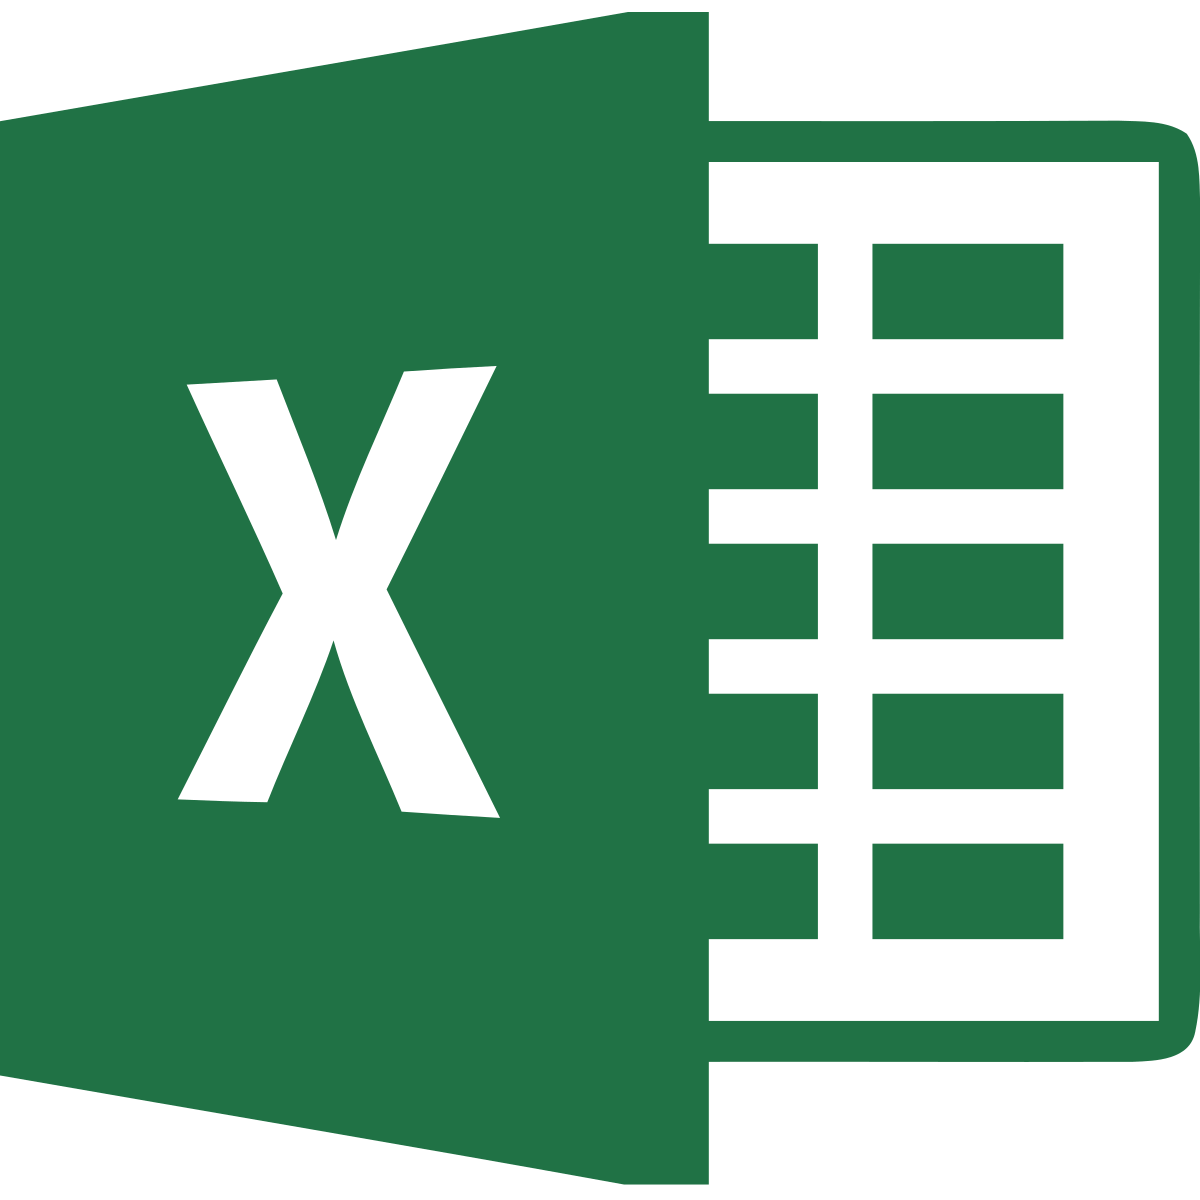 microsoft excel is trying to recover your information